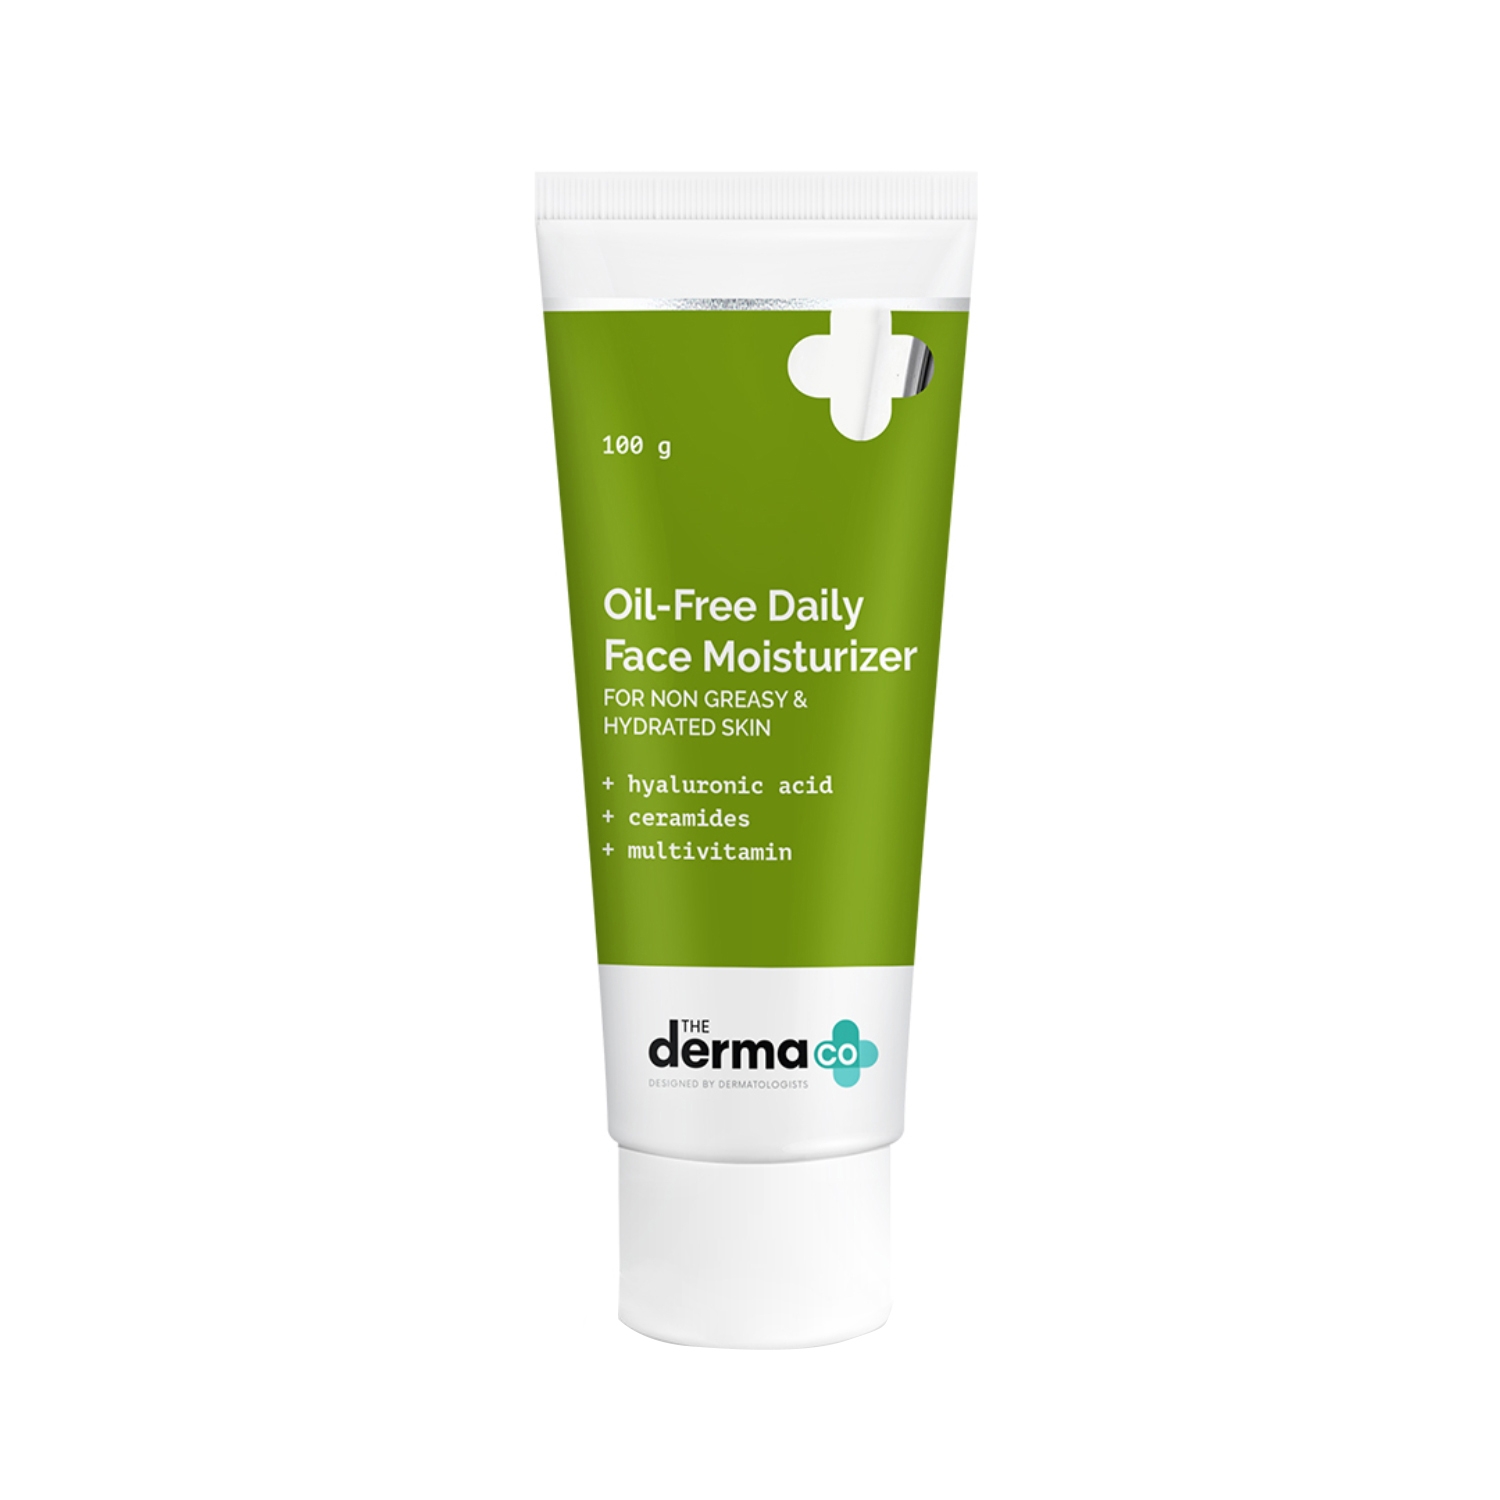 The Derma Co | The Derma Co Oil-Free Daily Face Moisturizer (100g)